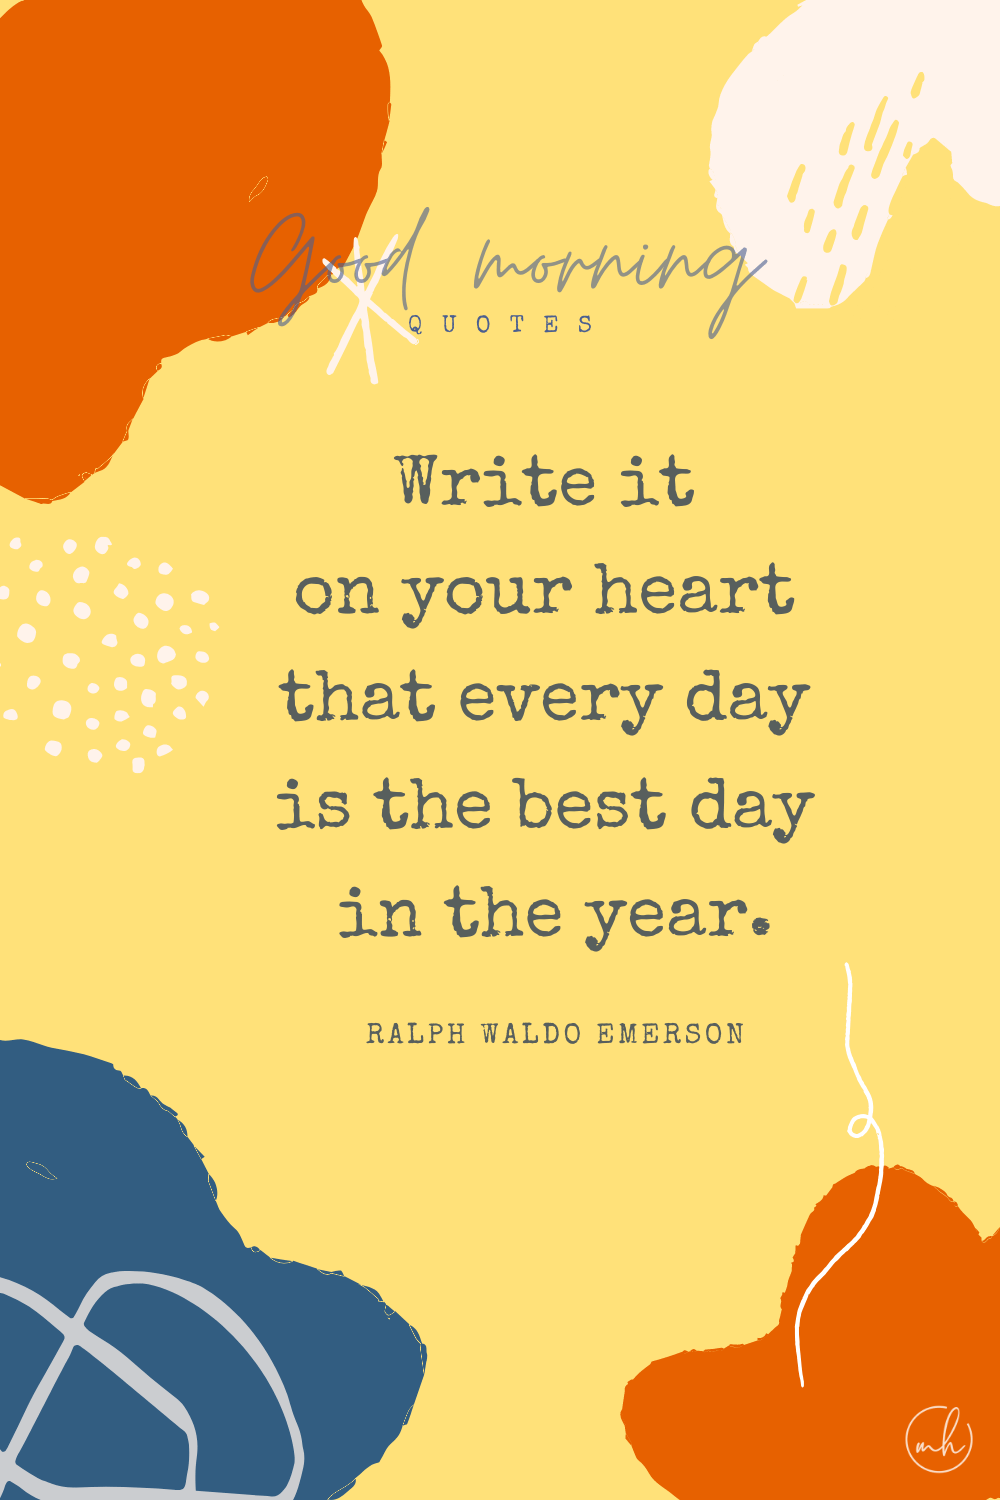 "Write it on your heart that every day is the best day in the year." – Ralph Waldo Emerson